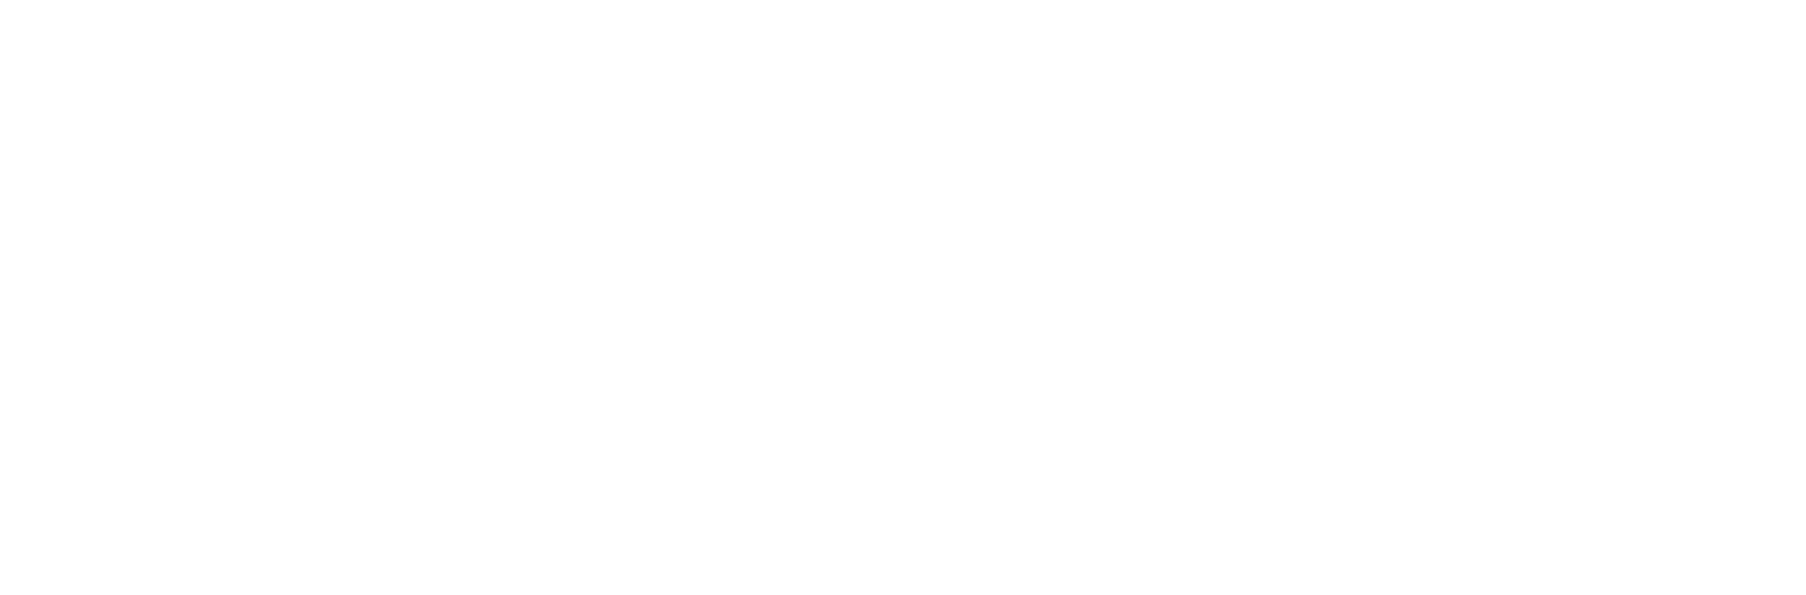 VTCleaning & Services